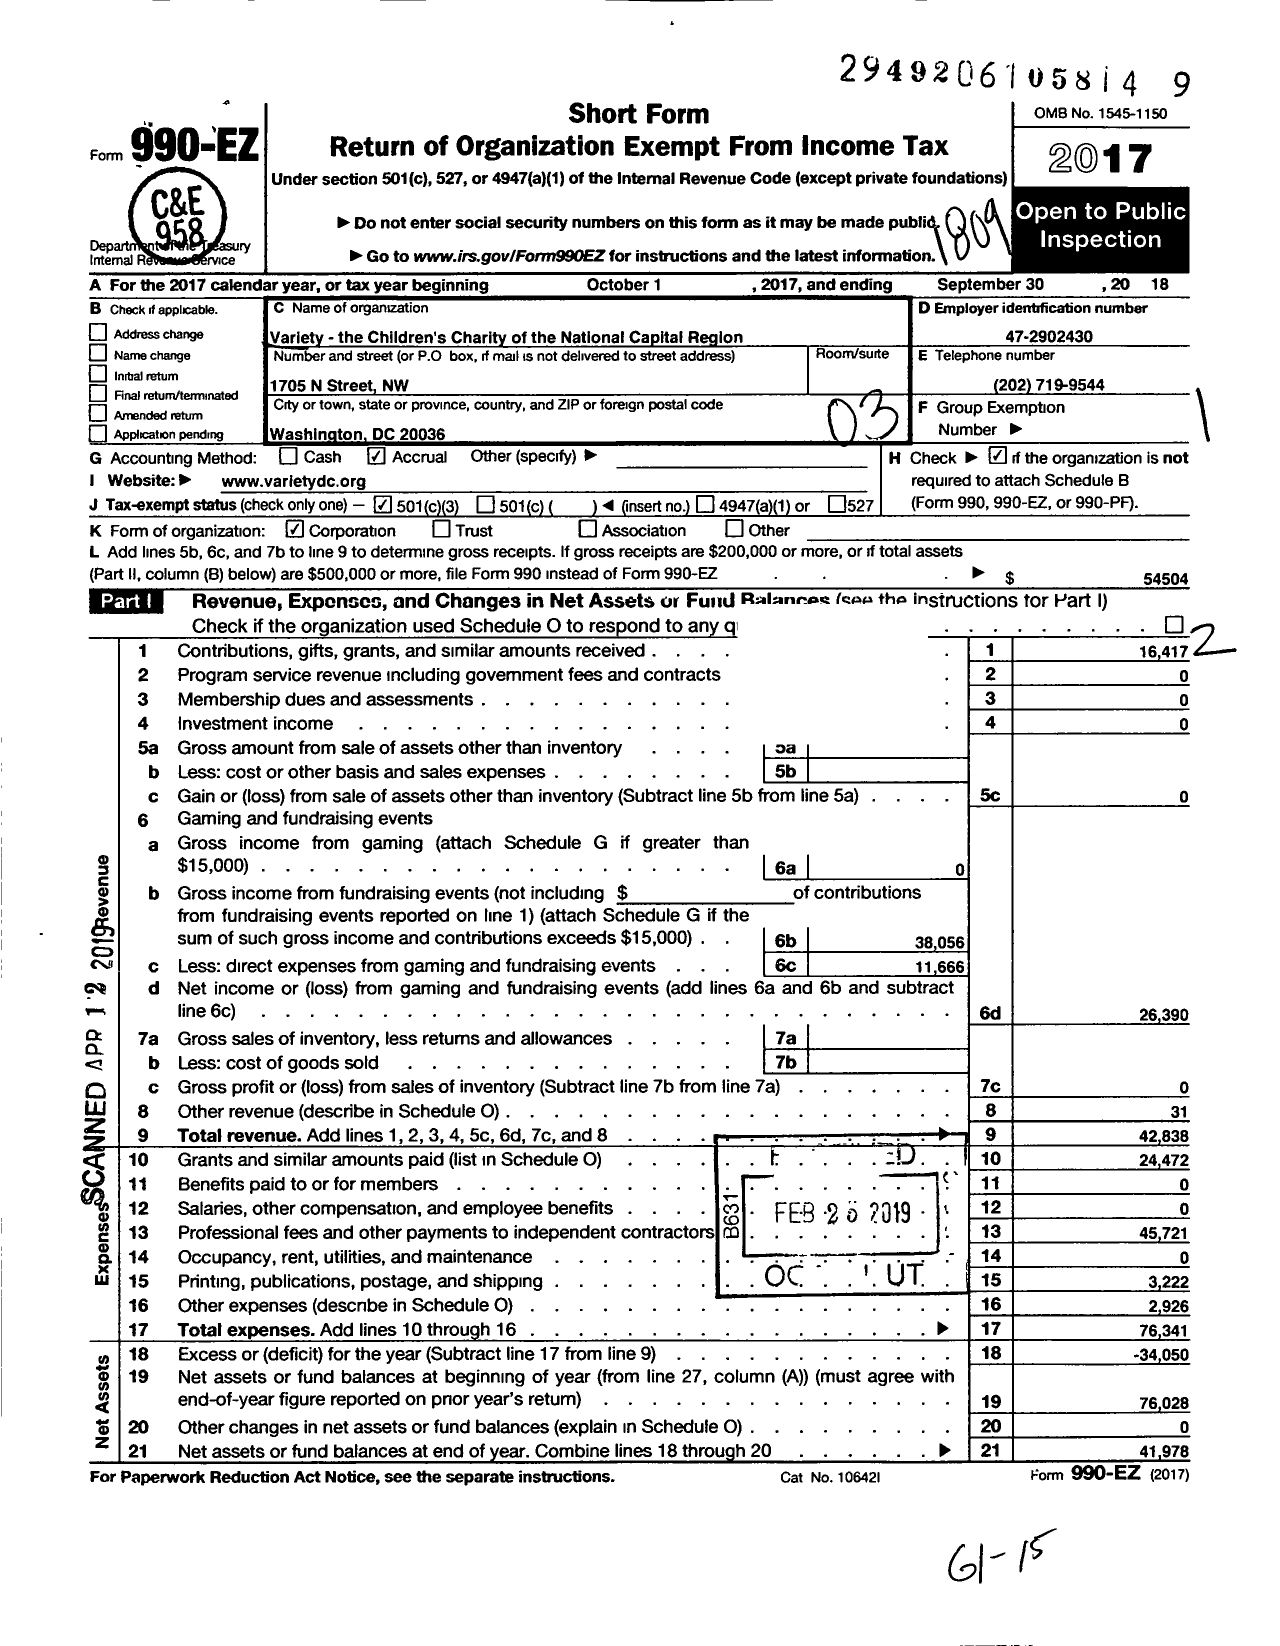 Image of first page of 2017 Form 990EZ for Variety - The Childrens Charity of the National Capital Region